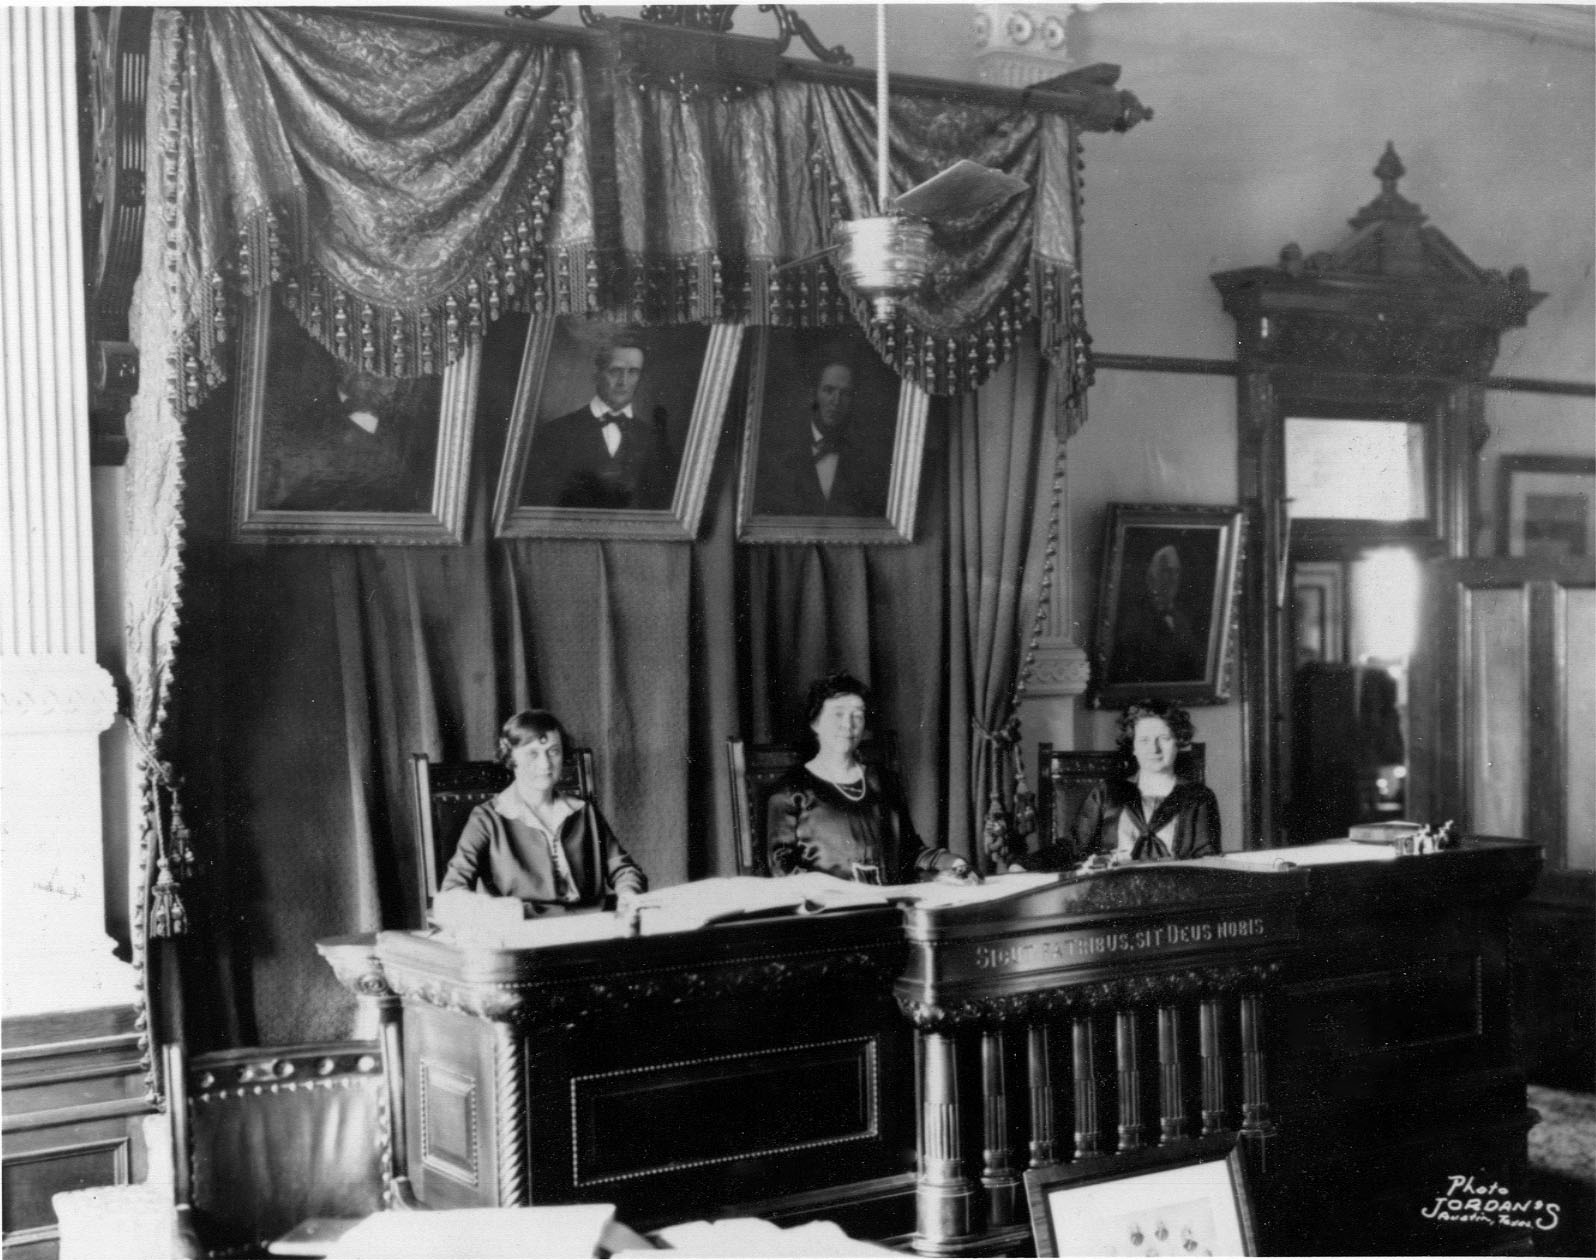 The 1925 "All Woman" Court. Left to right: Justice Ruth Brazzil, Chief Justice Hortense Ward, and Justice Hattie Henenberg. Photo: TSLAC.